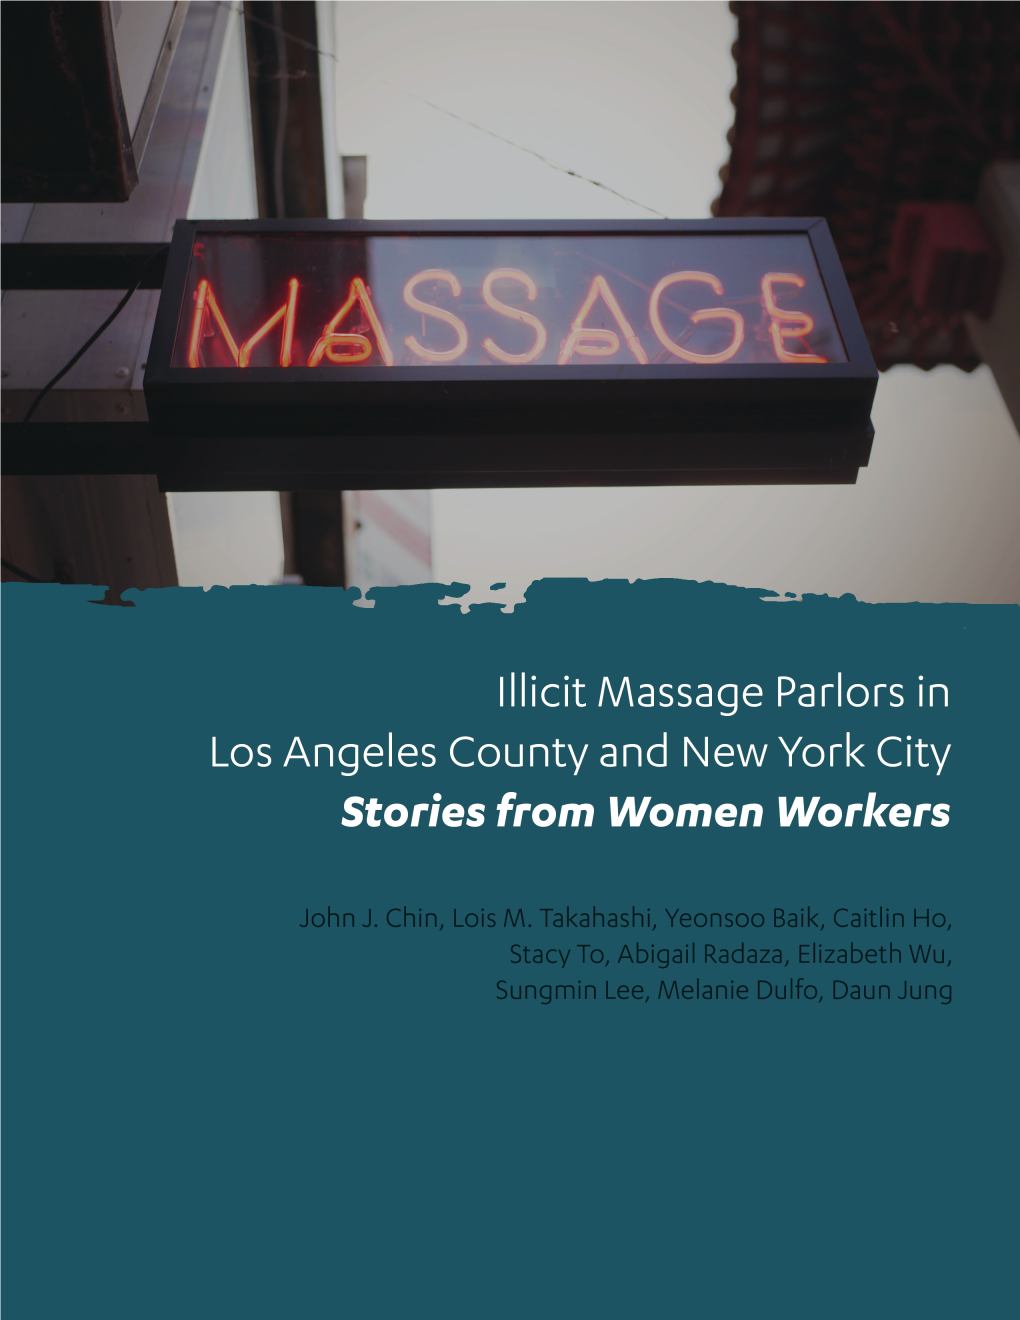 Massage Parlor Industry Continues to Thrive in Major Metropolitan Cities and Suburban Community Enclaves in the United States